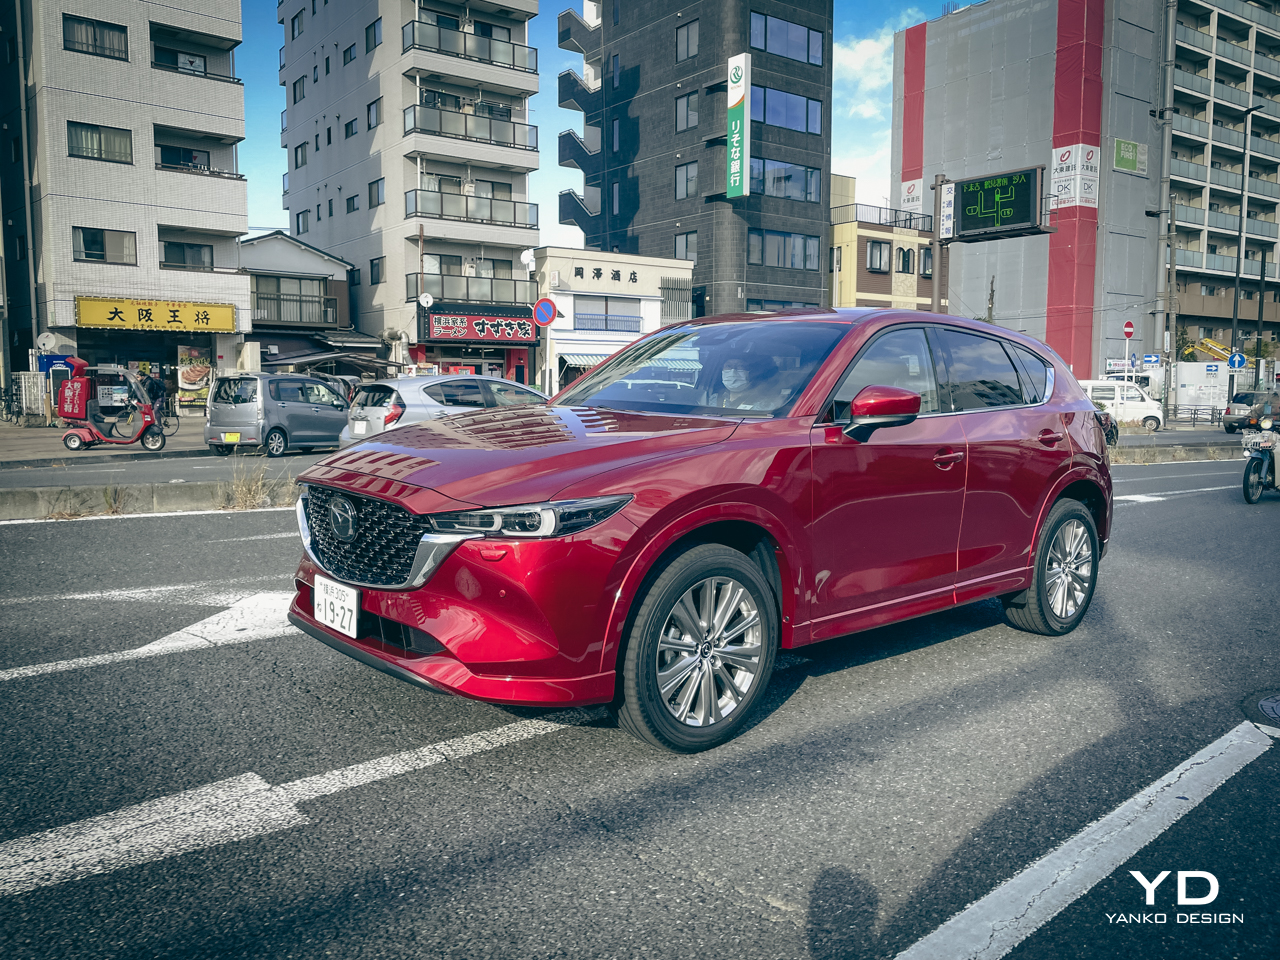 2022 Mazda CX-5 first drive launch review